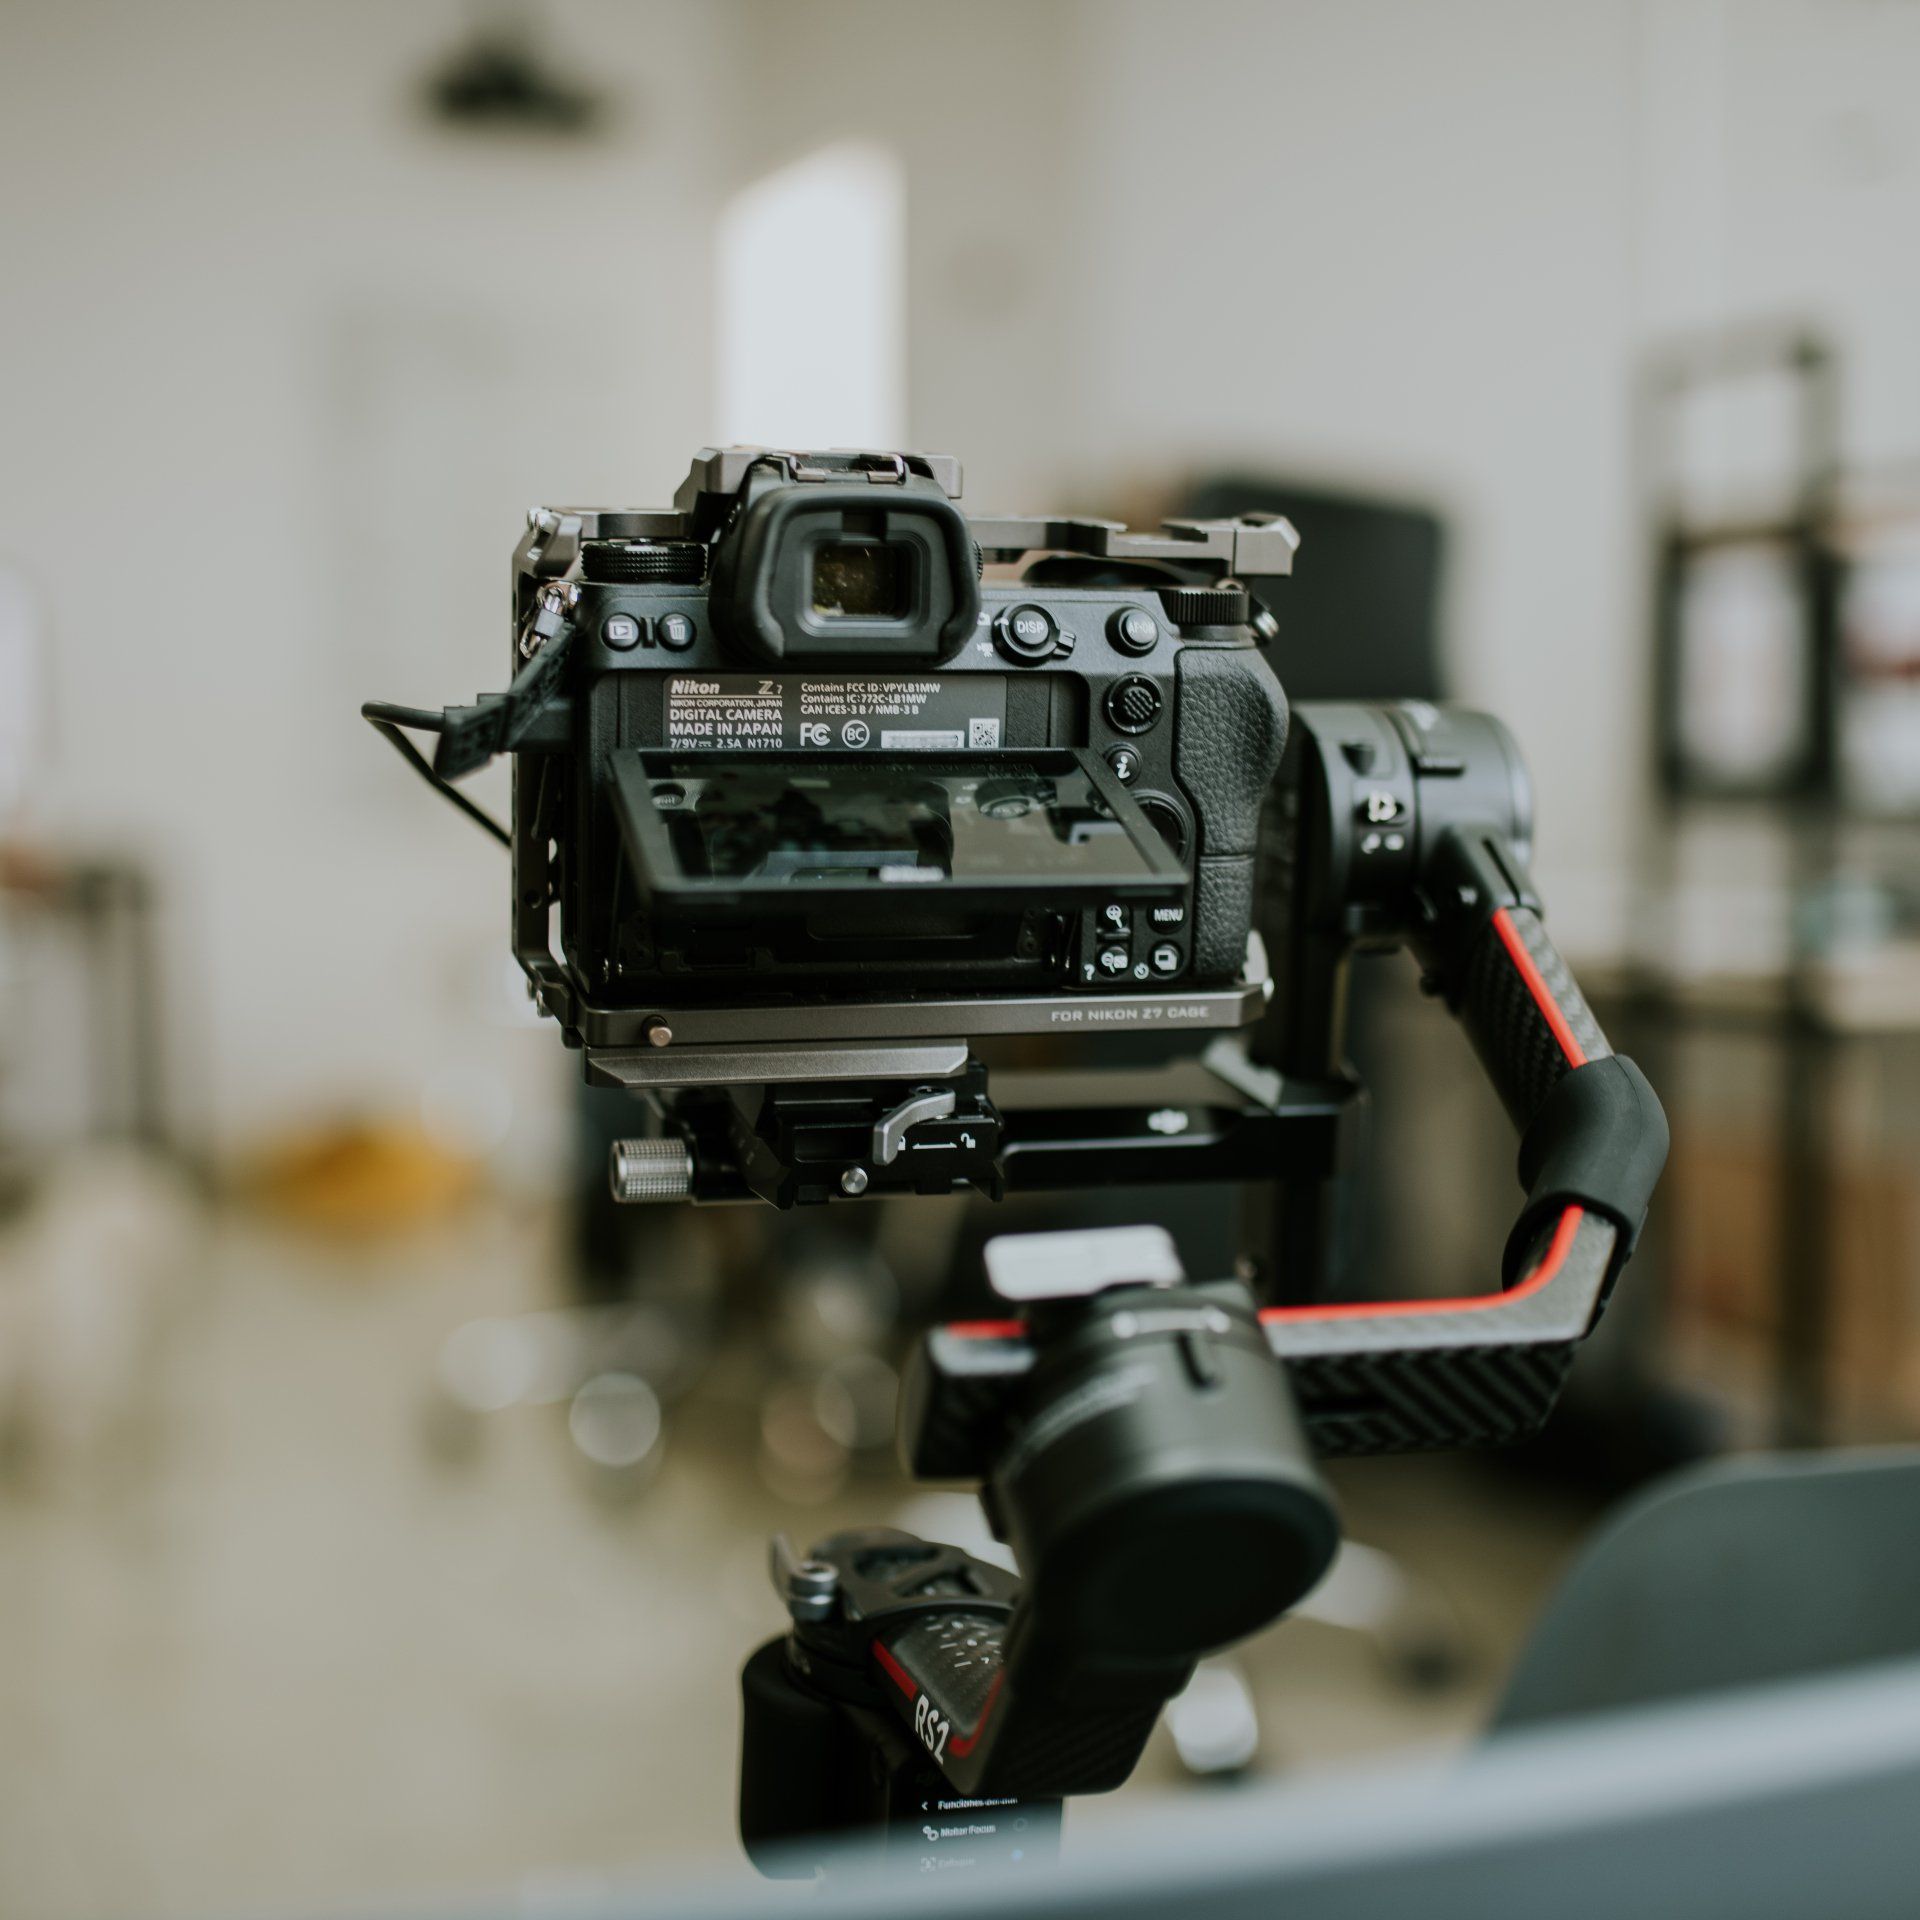 Gimbal Camera for Videography Services: An image displaying a gimbal-mounted camera used for professional videography services. The camera is stabilized by the gimbal, allowing smooth and steady footage capture. 